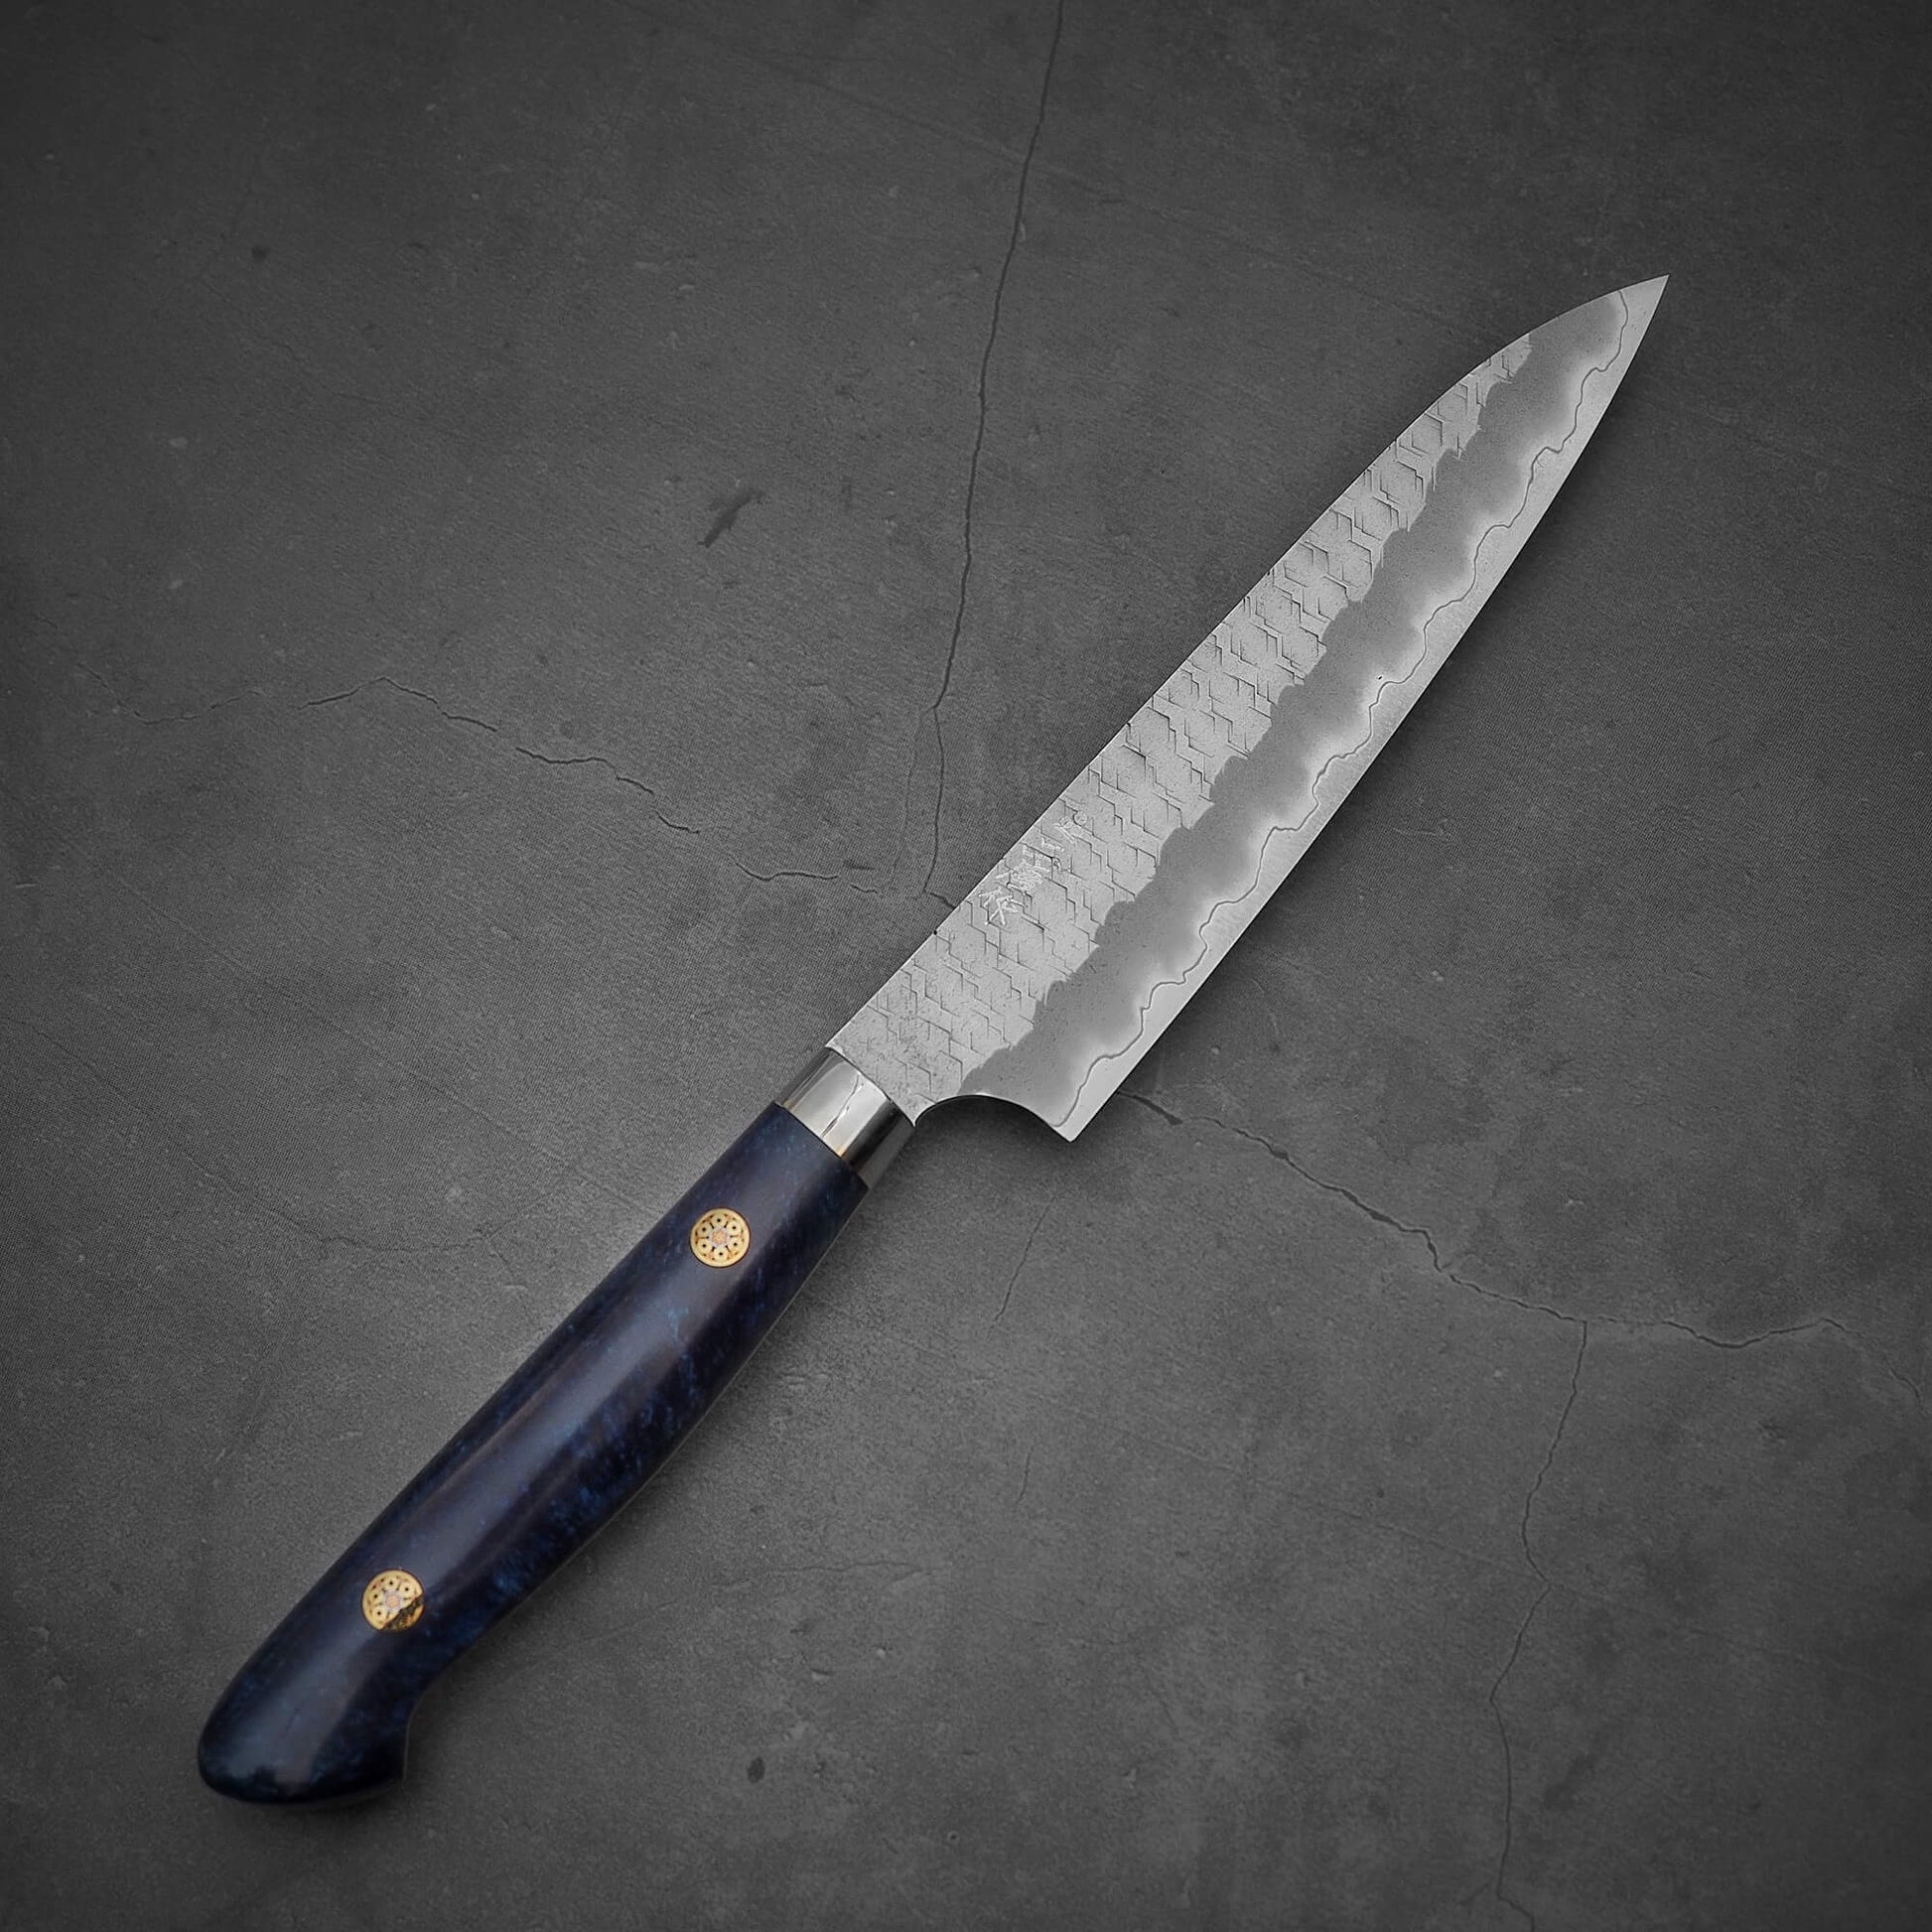 Top view of Nigara tsuchime SG2 petty knife 150mm in diagonal position